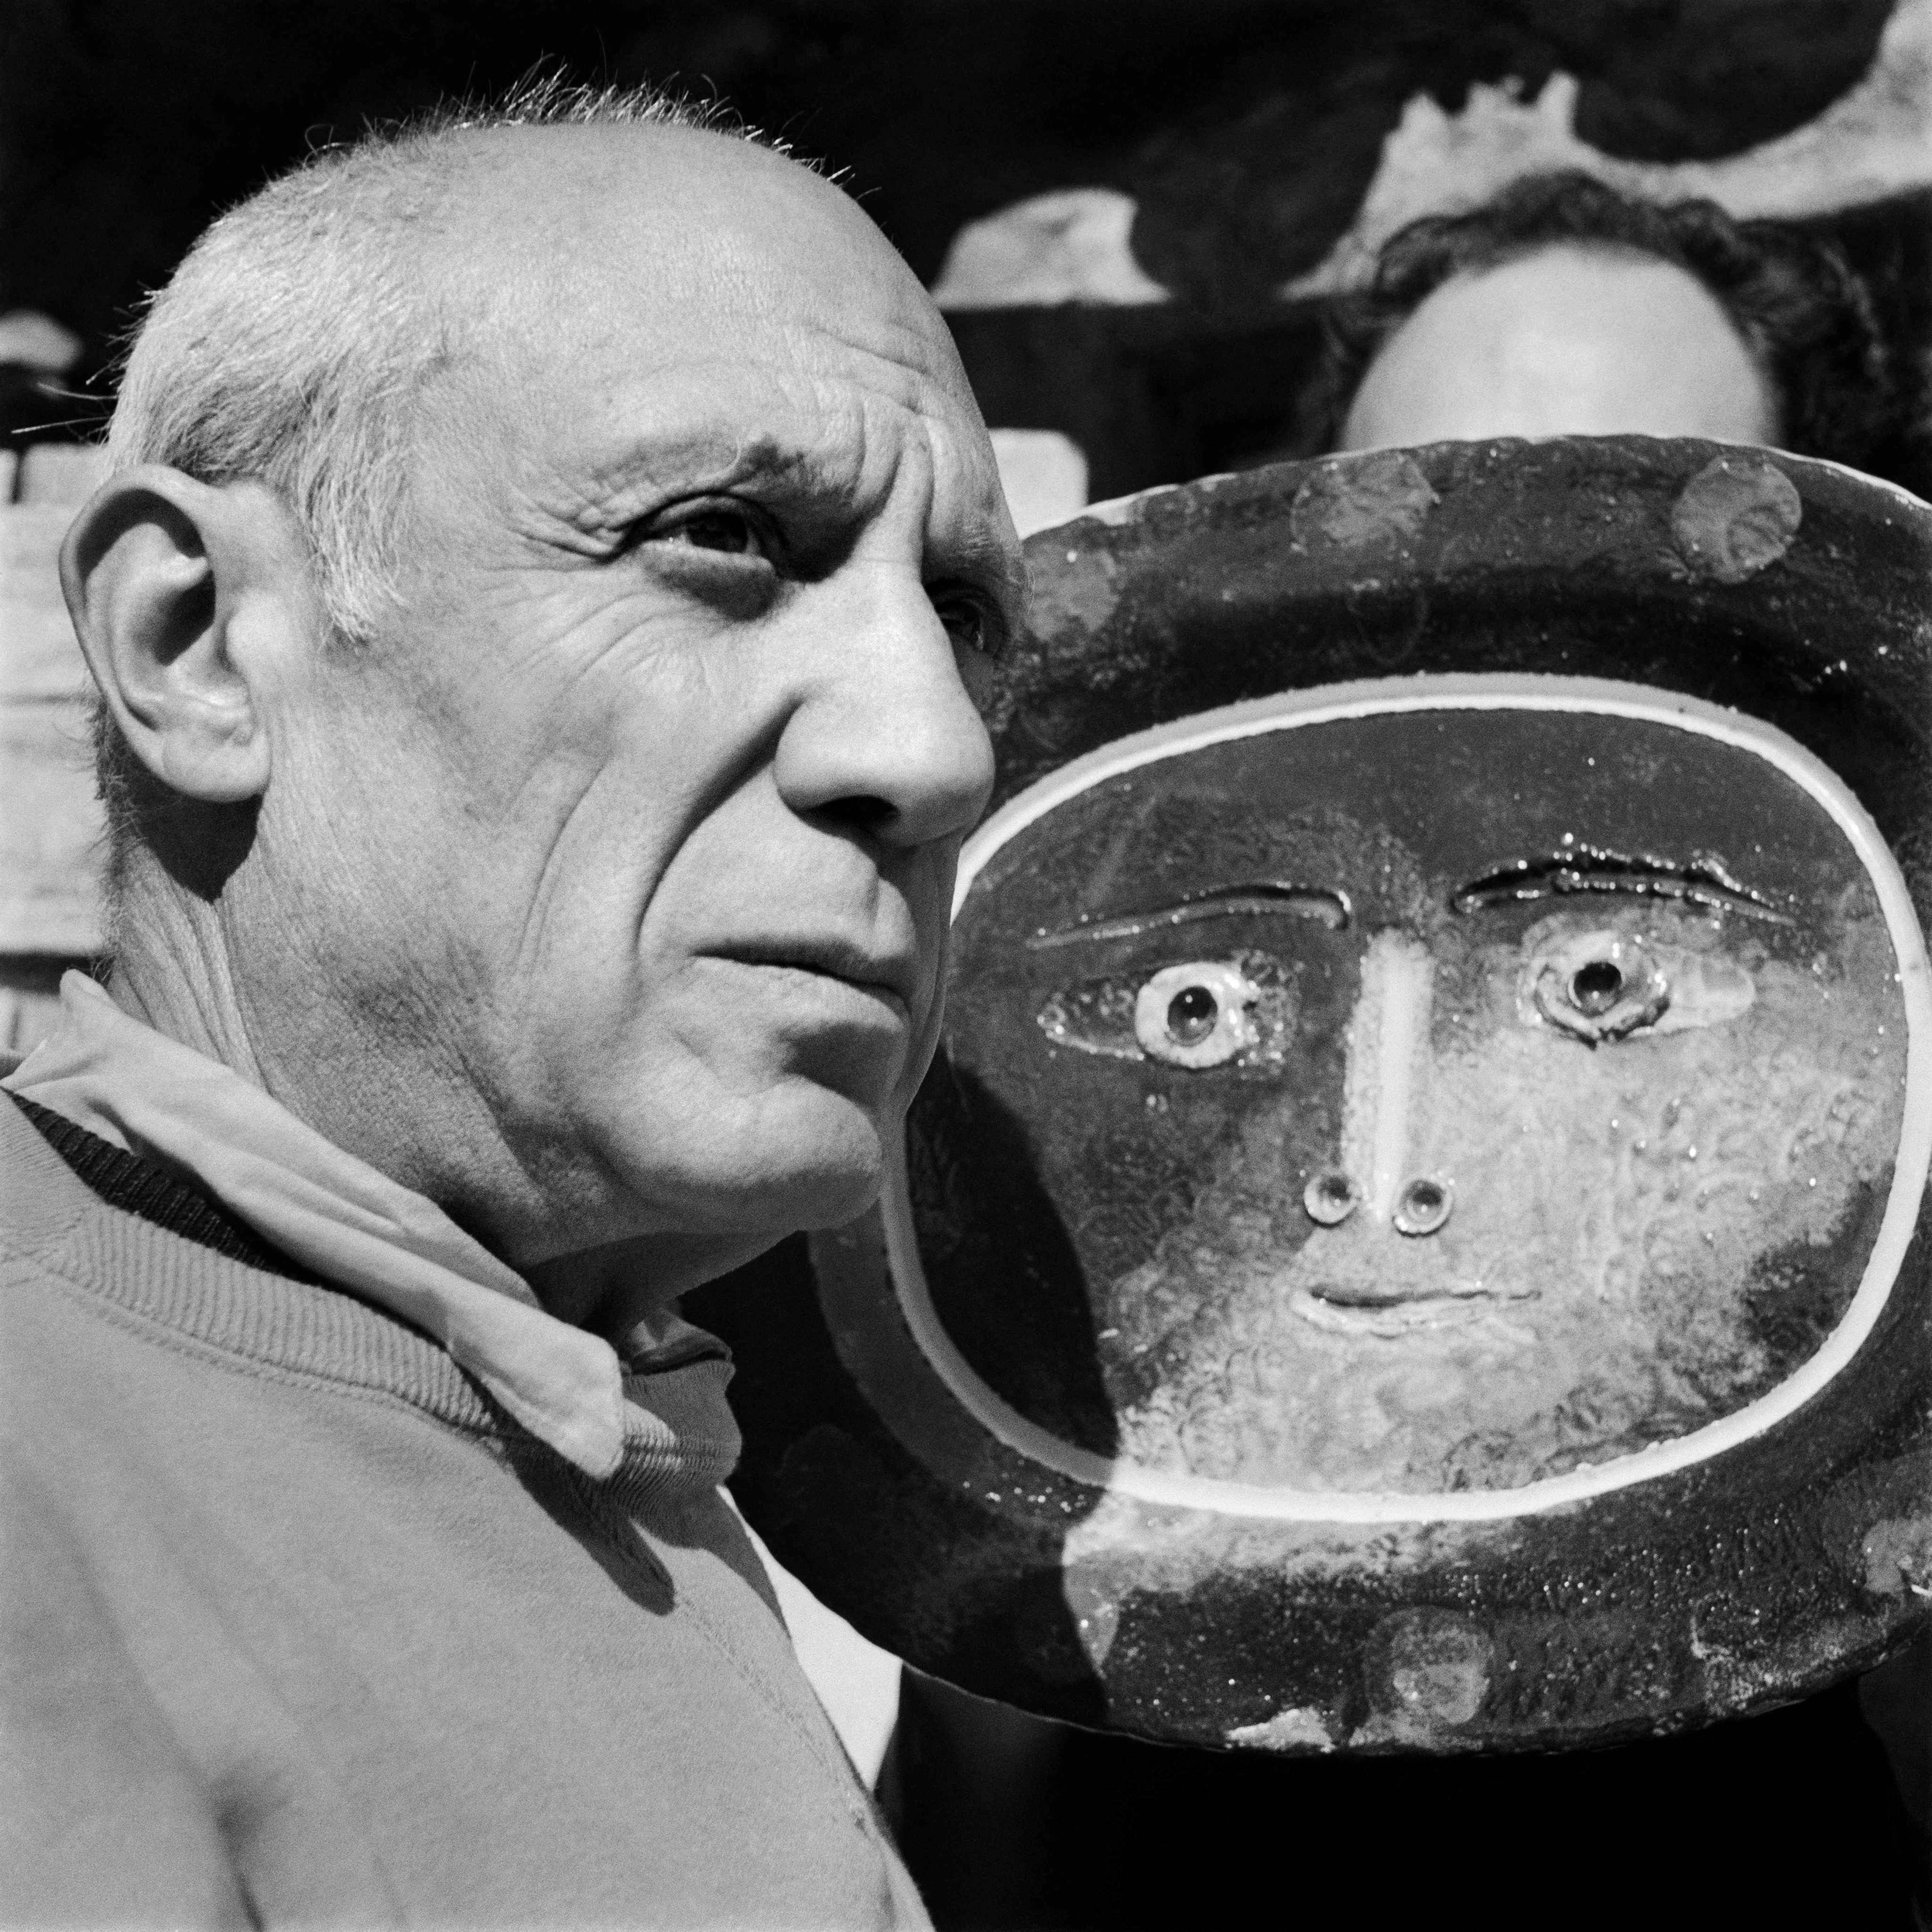 The debate about the legacy of Spanish artist Pablo Picasso has been reframed by the #MeToo movement. Photo: AFP